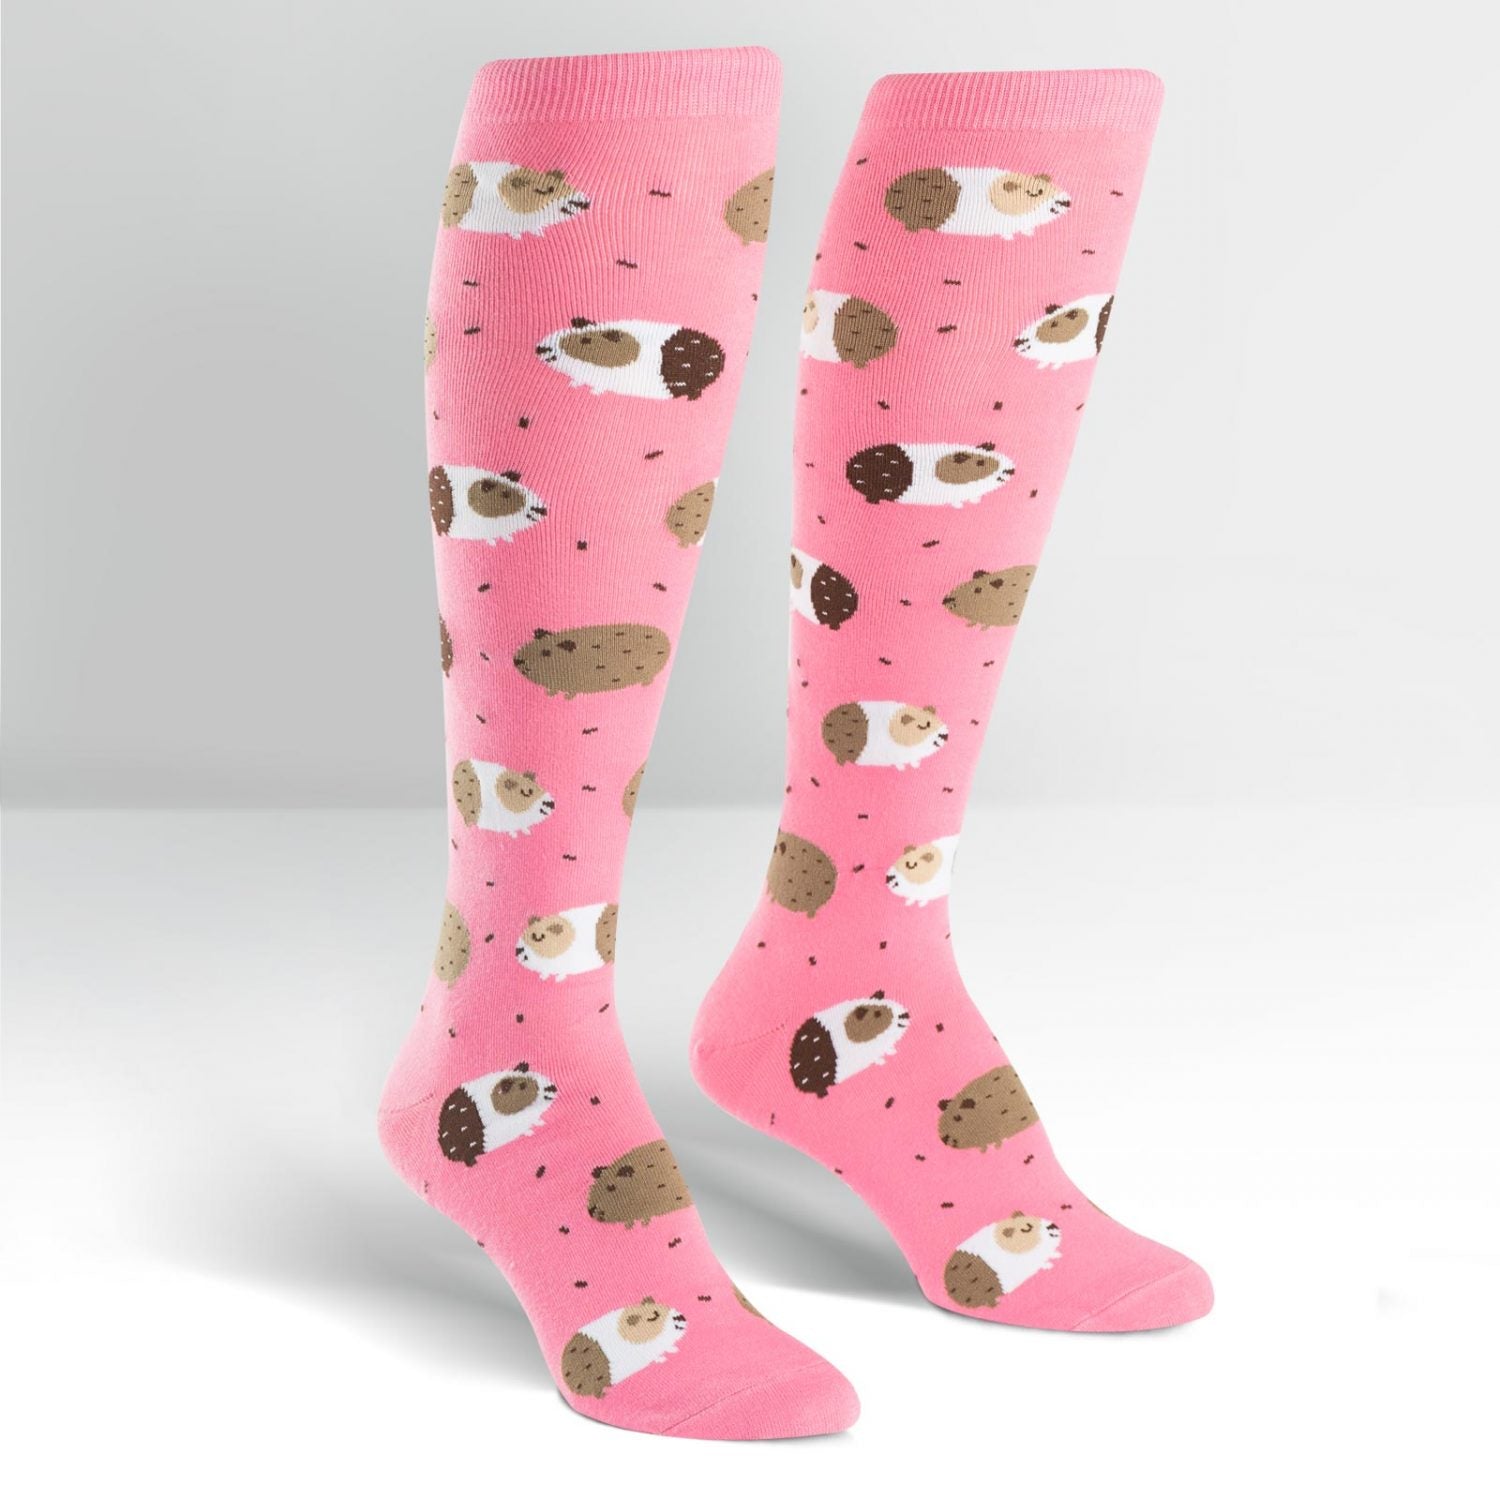 Pink knee high socks with brown and white guinea pigs all over - The Sockery